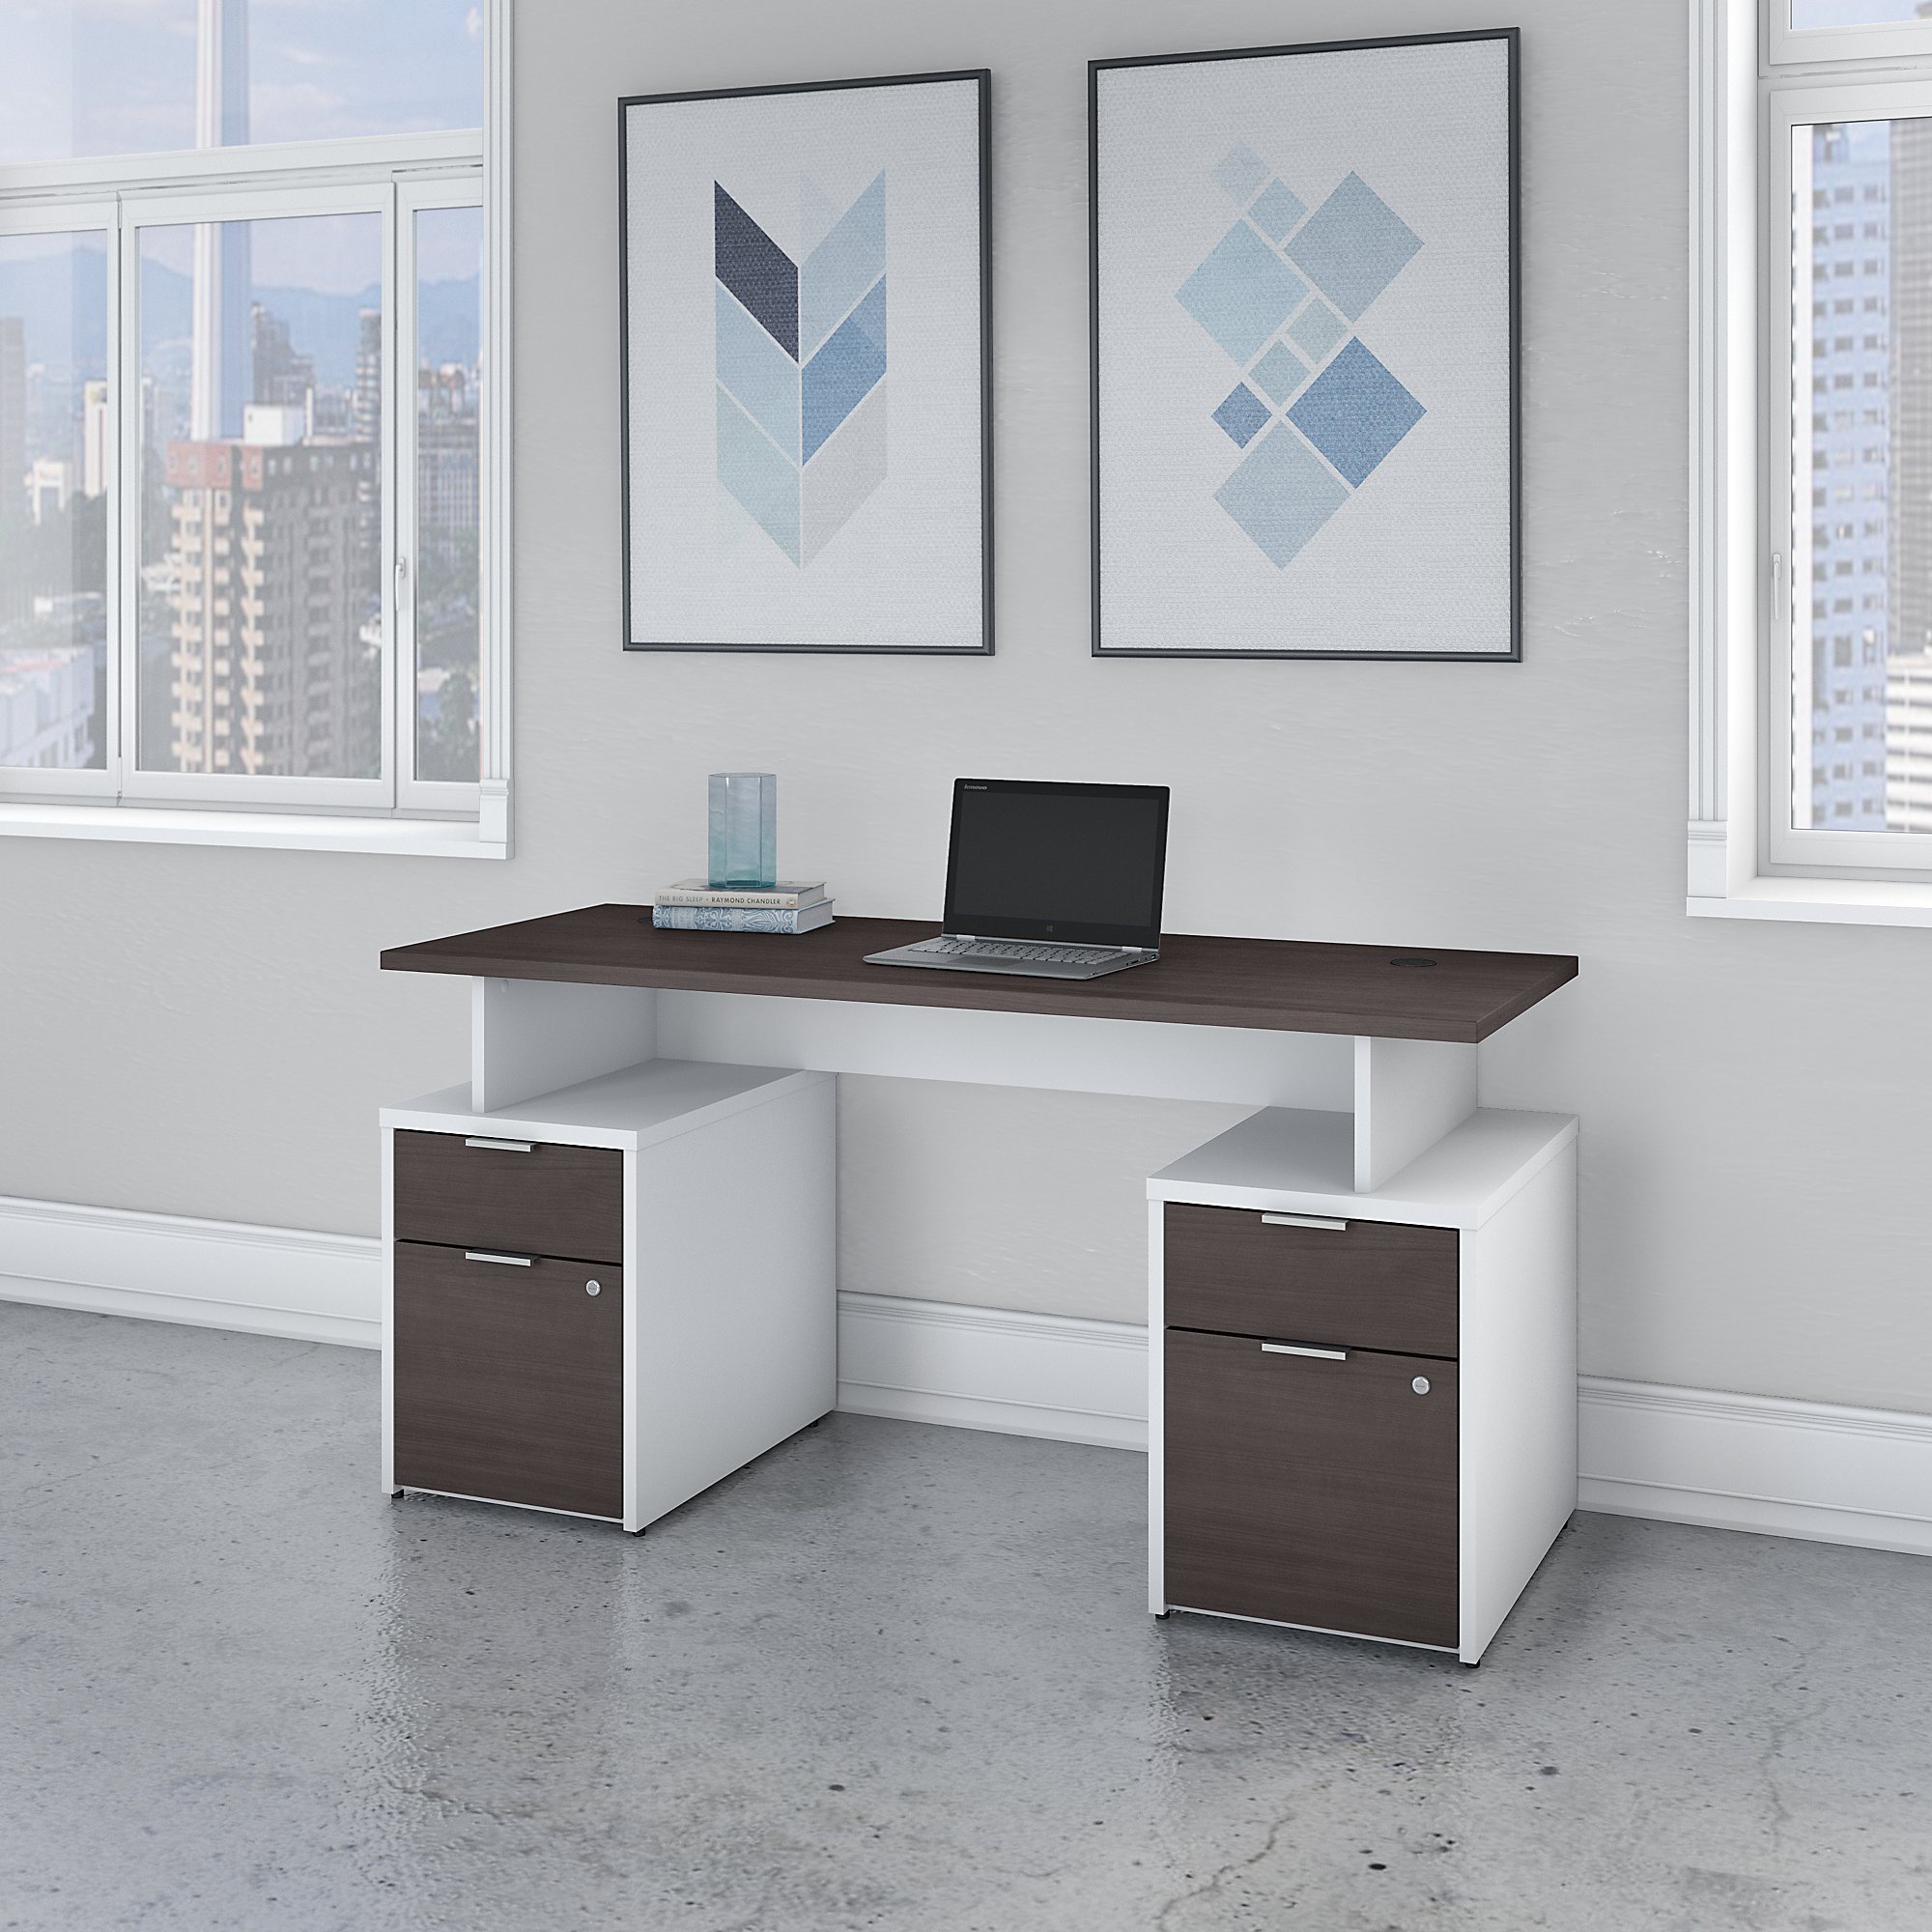 Home office furniture desk 4 drawers environmental